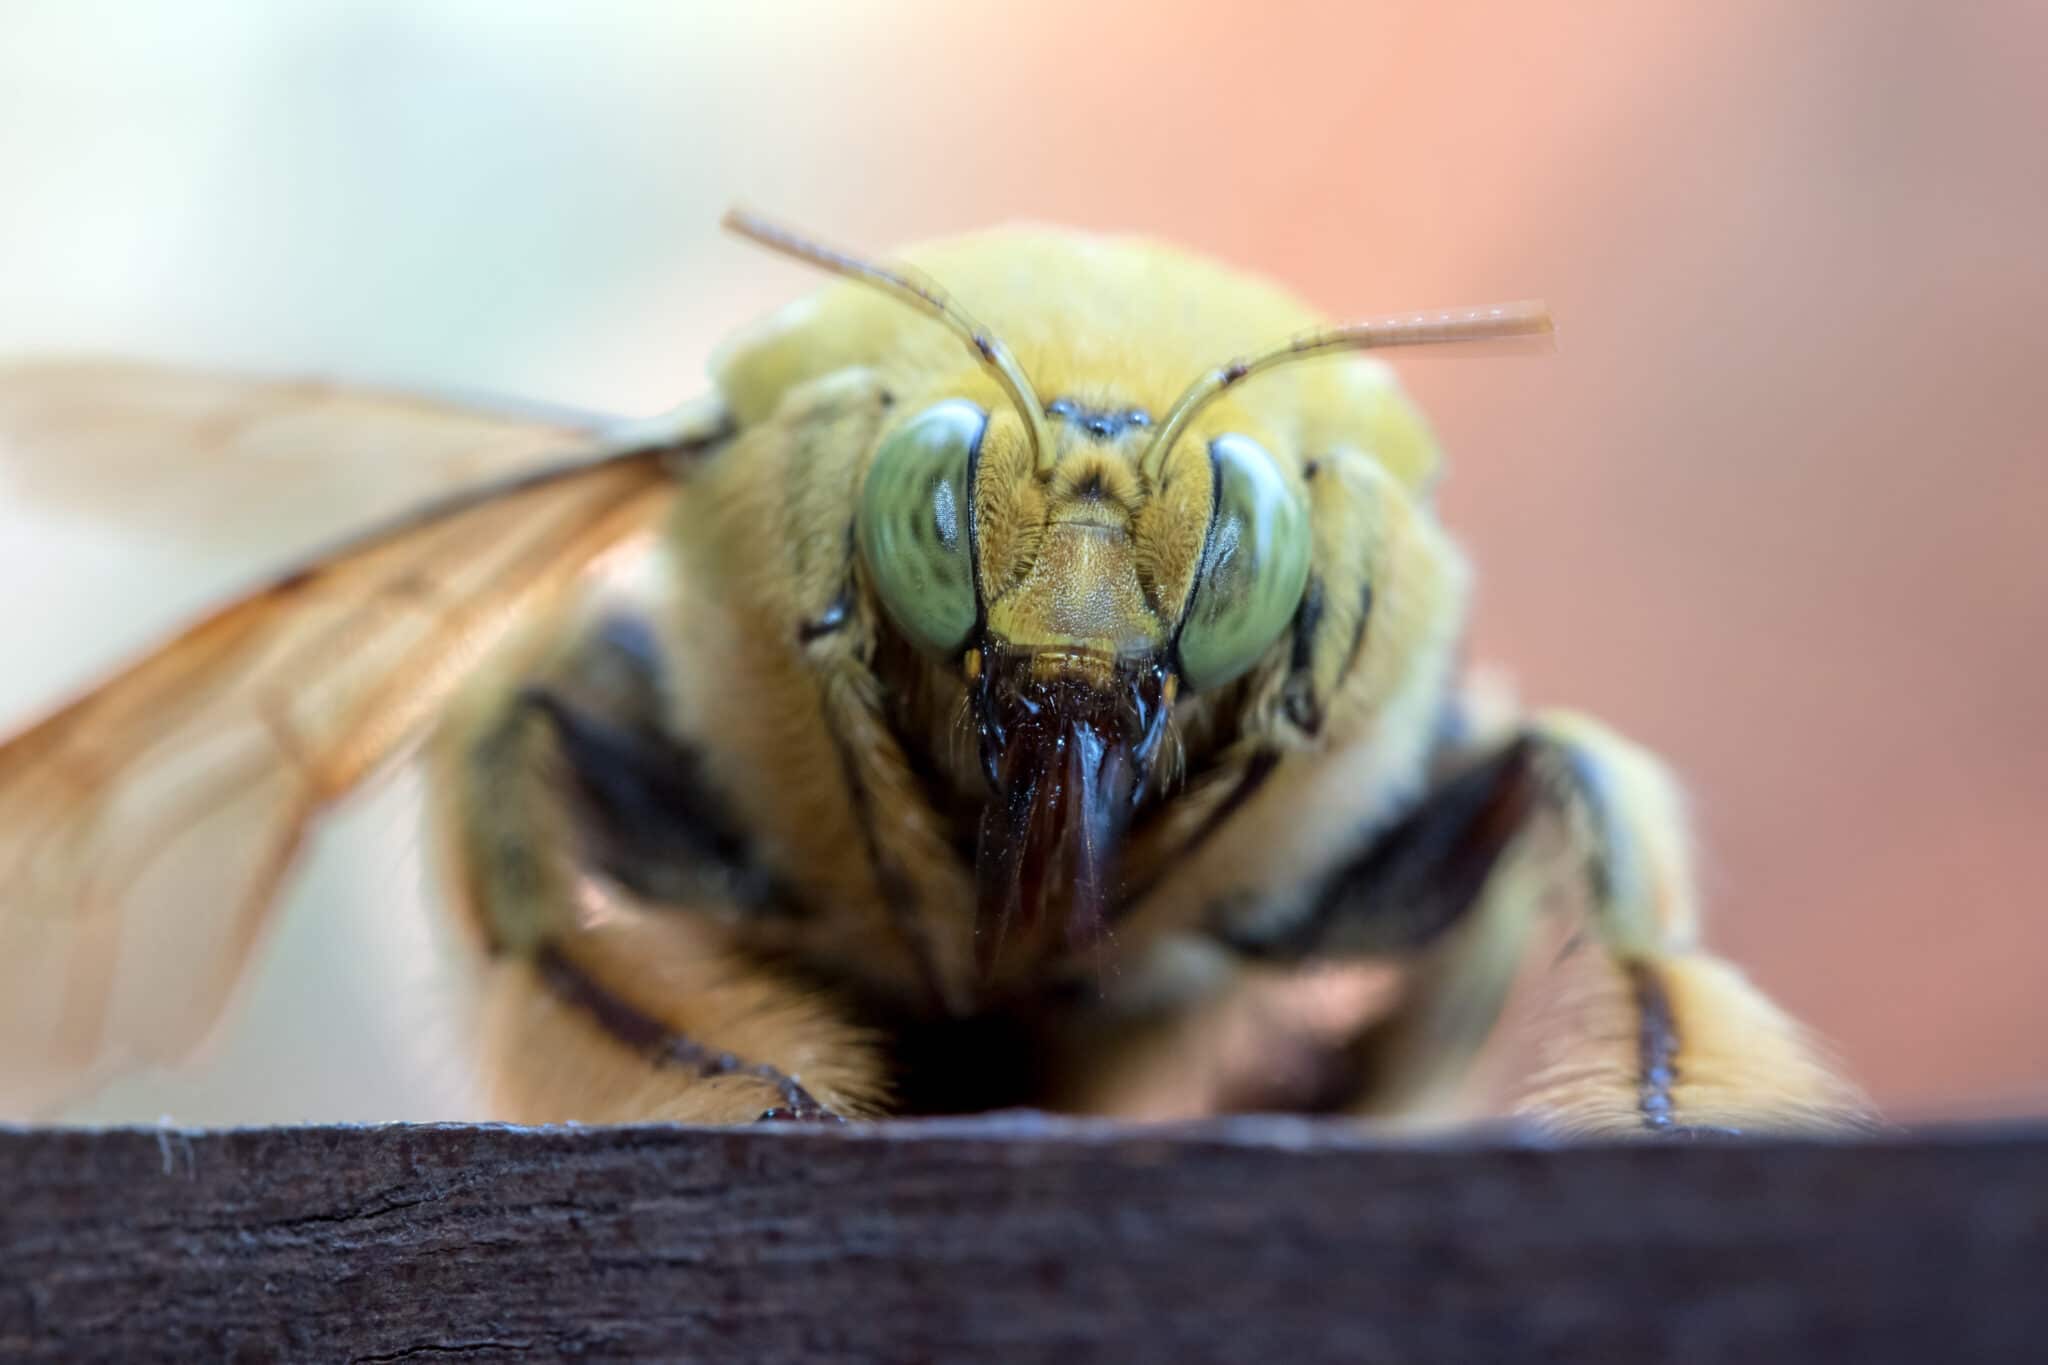 the tropical carpenter bee, Xylocopa latipes, sits on wood, macro view